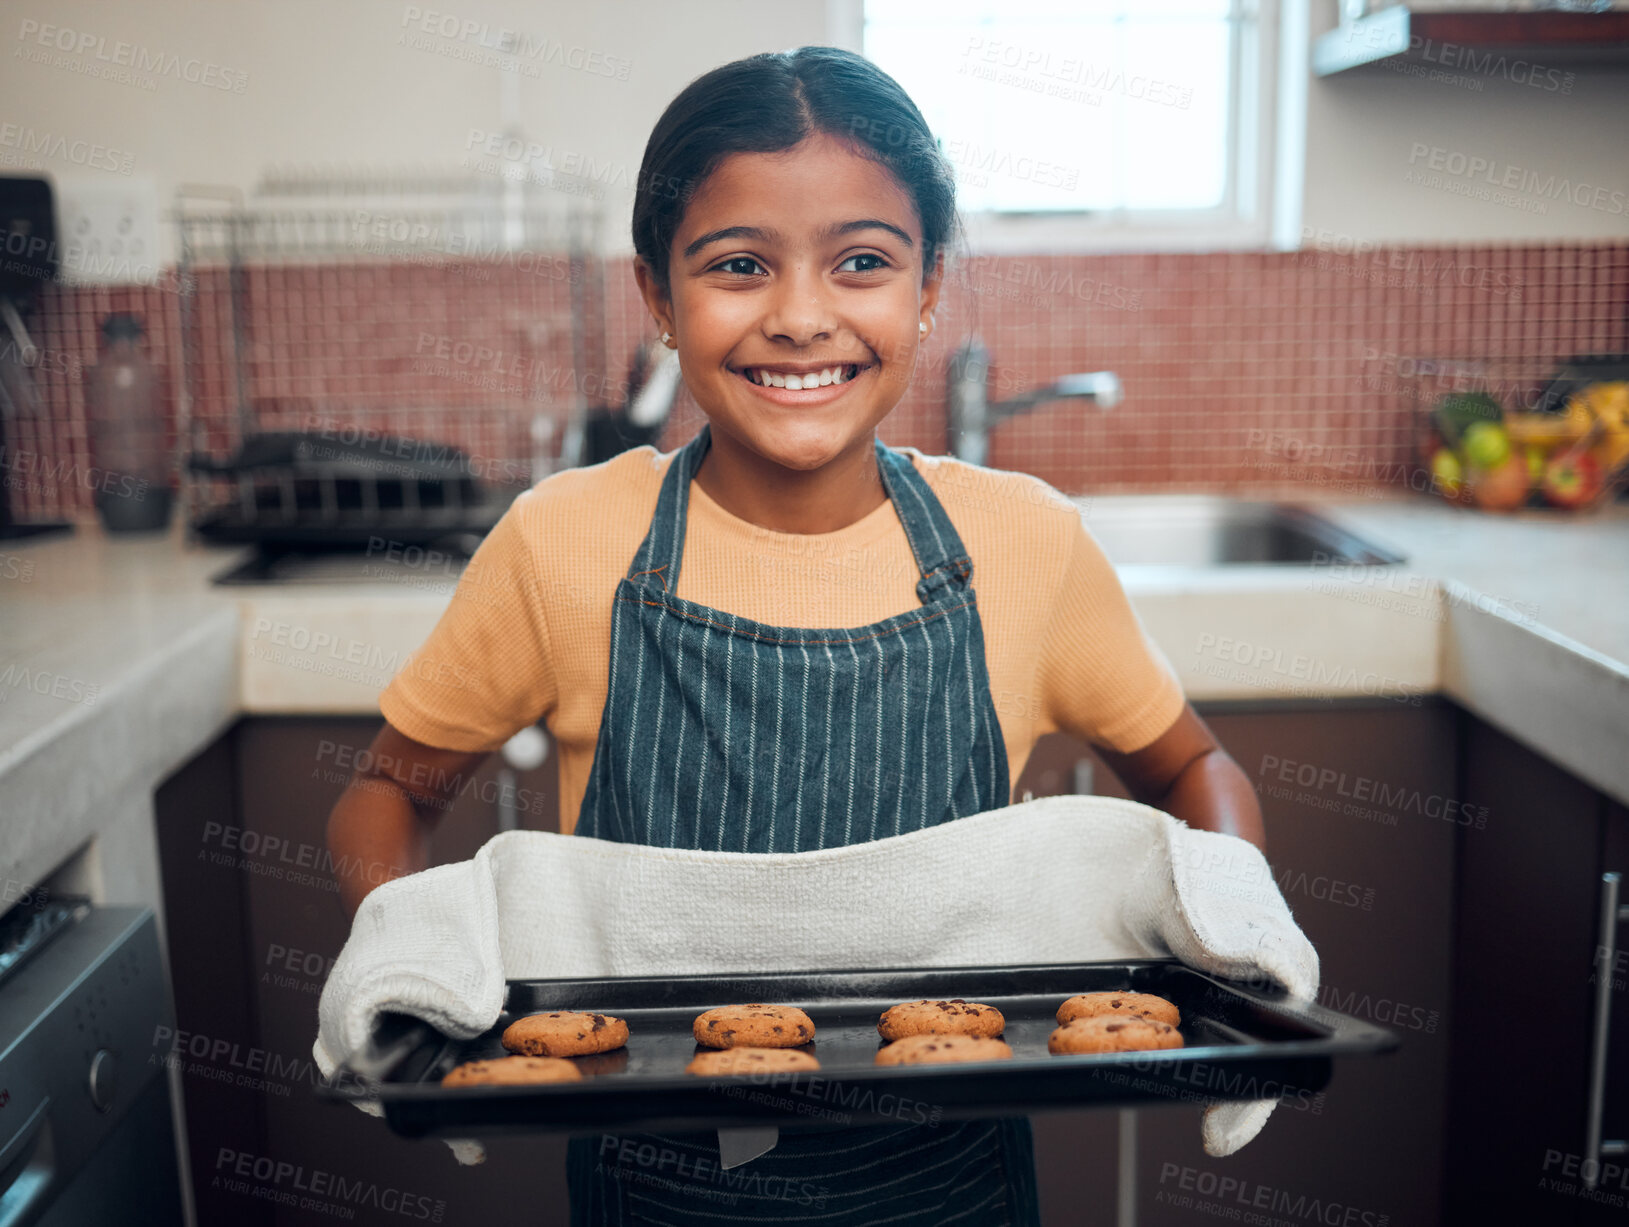 Buy stock photo Baking, cookies and children with an indian girl cooking baked goods in the kitchen of her home alone. Food, kids and apron with a female child learning how to bake in her house in the morning